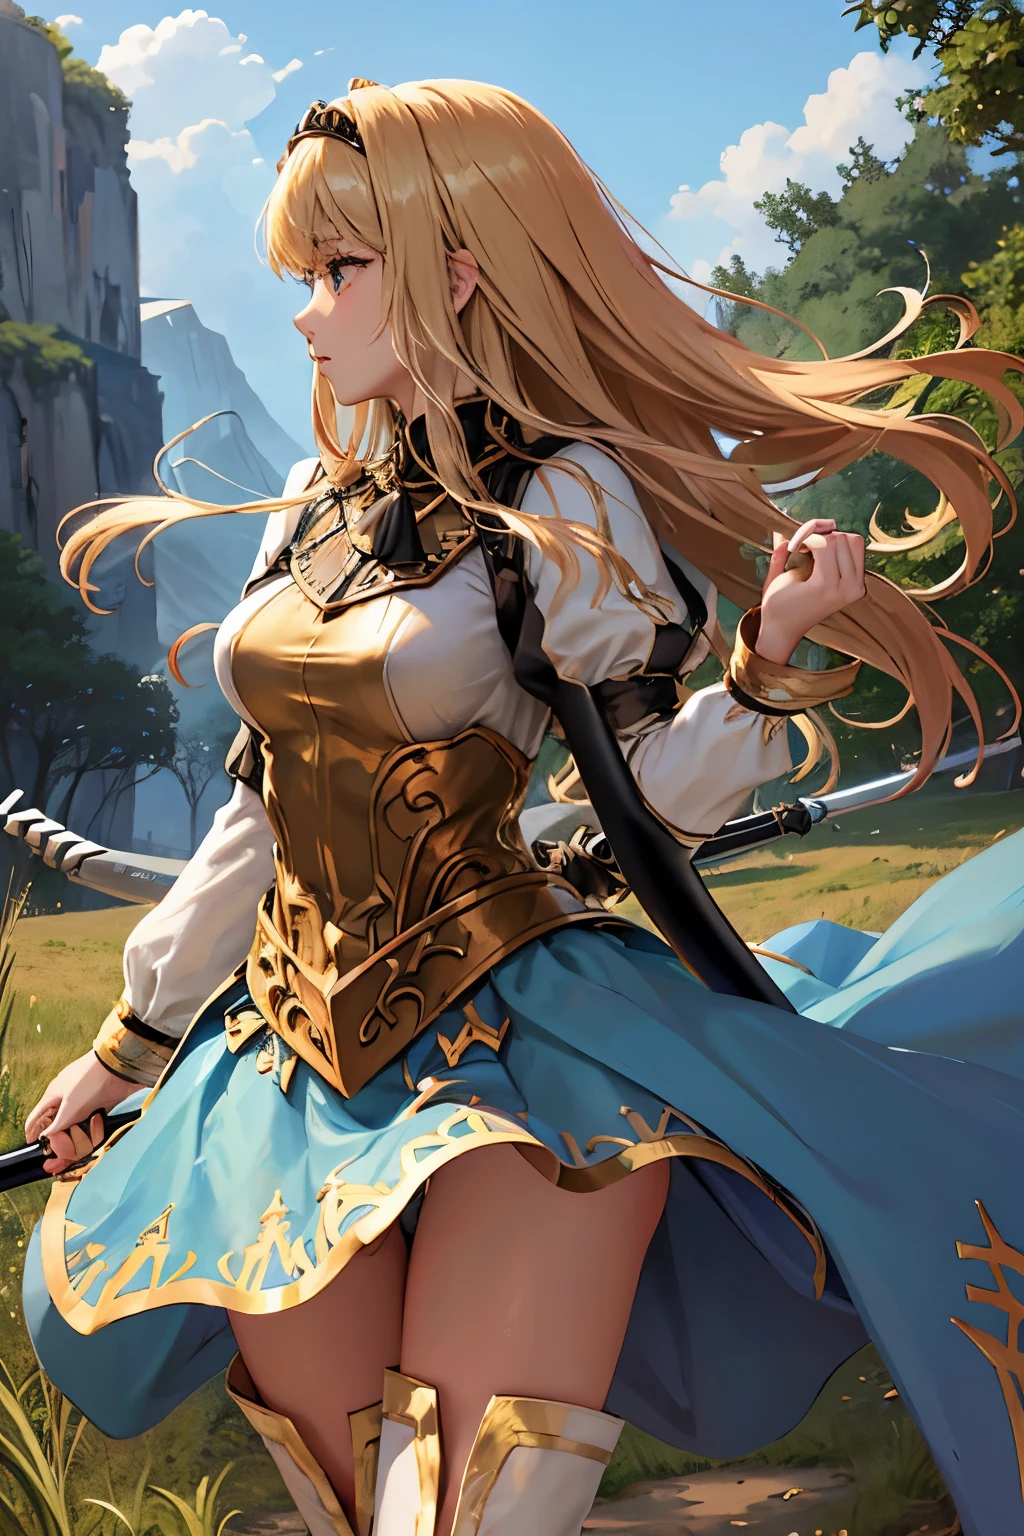 （（（ＳＦＷ、sound、Highest quality、first-clasasterpiece、Normal body、8K、Detailed face、Ultra-precision、Normal hand、Normal finger、５Finger、Highest）））、beautiful girl、Golden blonde;1.4、slender、low length、Thin legs、Alisha、Valkyrie Profile、princess、Rapier、Fleeting、Deep woods、profile、Rapier、attack、The skirt is blown up by the wind、Panty shot、Pure white pants、I can see your pants